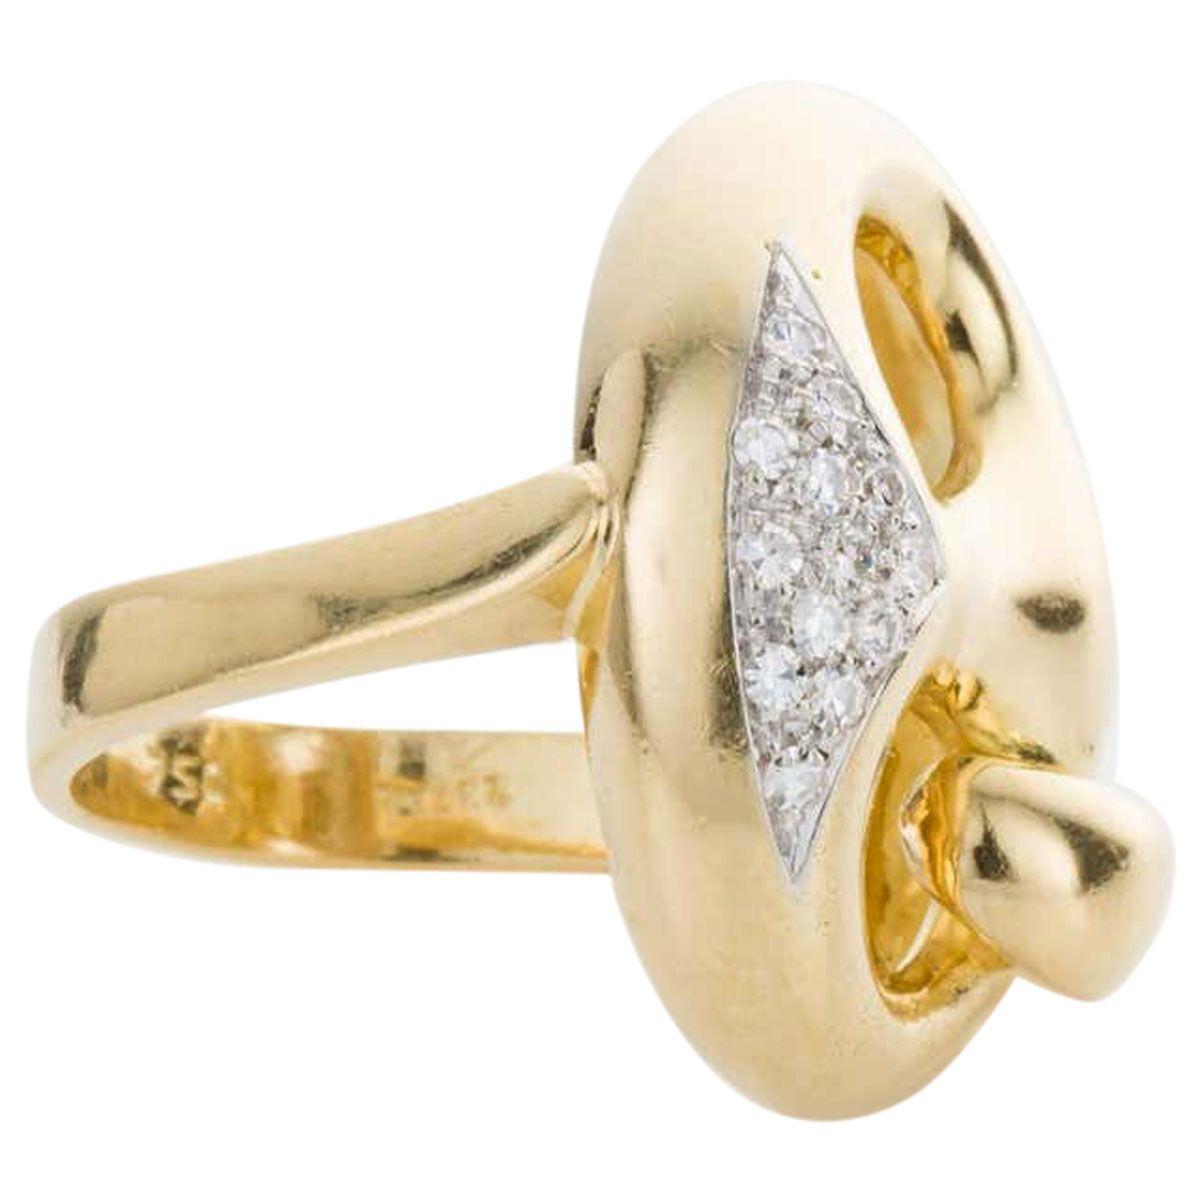 Ultra cool and so chic! A 18k yellow gold mariner link ring, it's a bit 'Gucci' style without the price tag. Set with approximately 0.20cts of sparkly white single cut diamonds that sit on the side of the link, it's a unique look that's great on the